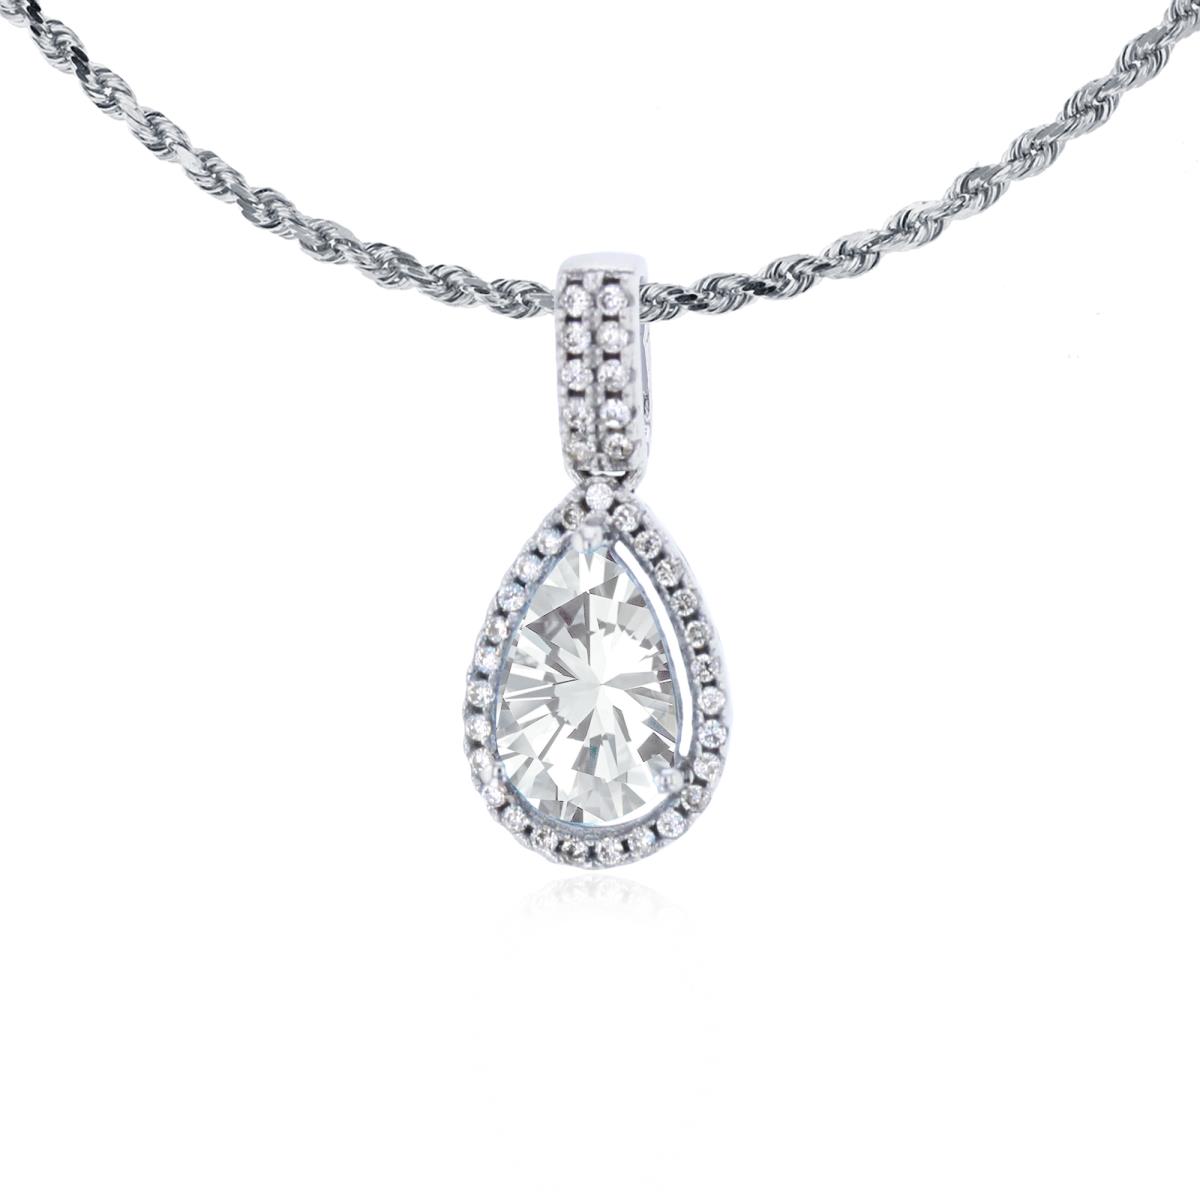 10K White Gold 8x5mm Pear Cut White Topaz & 0.11 CTTW Diamond Halo 18" Rope Chain Necklace